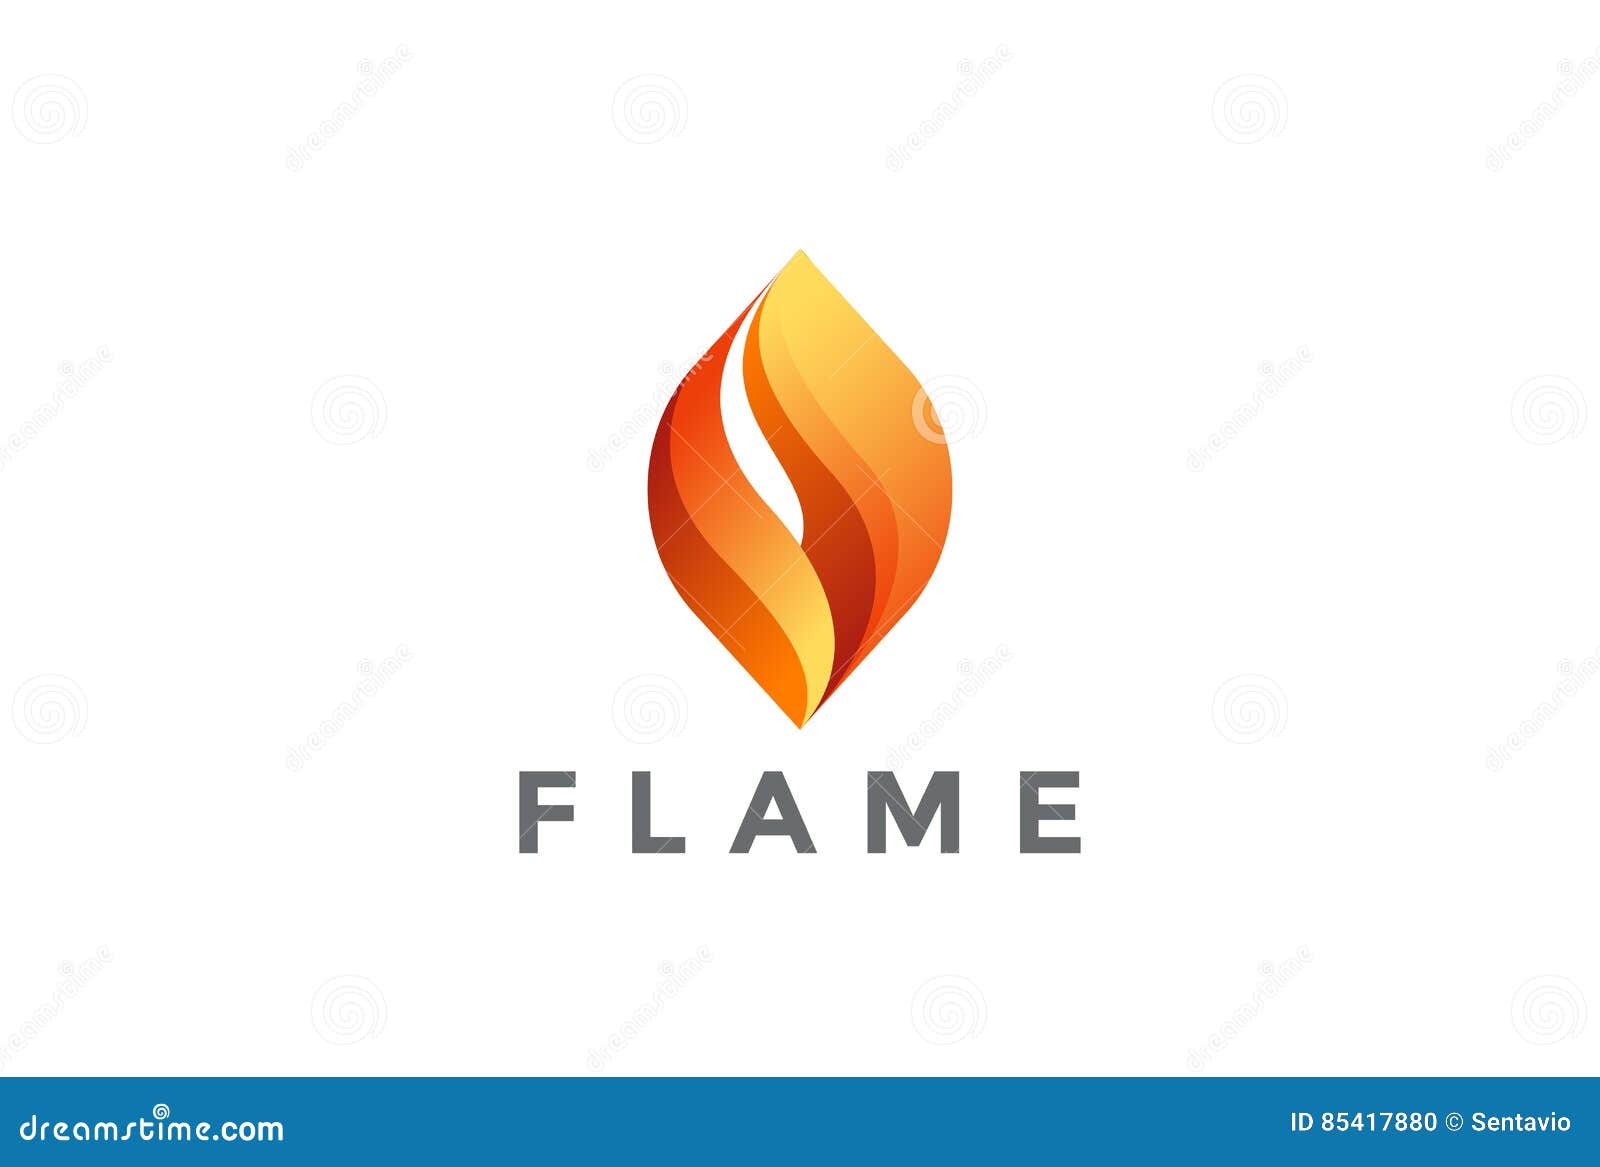 fire flame logo  . abstract logotype